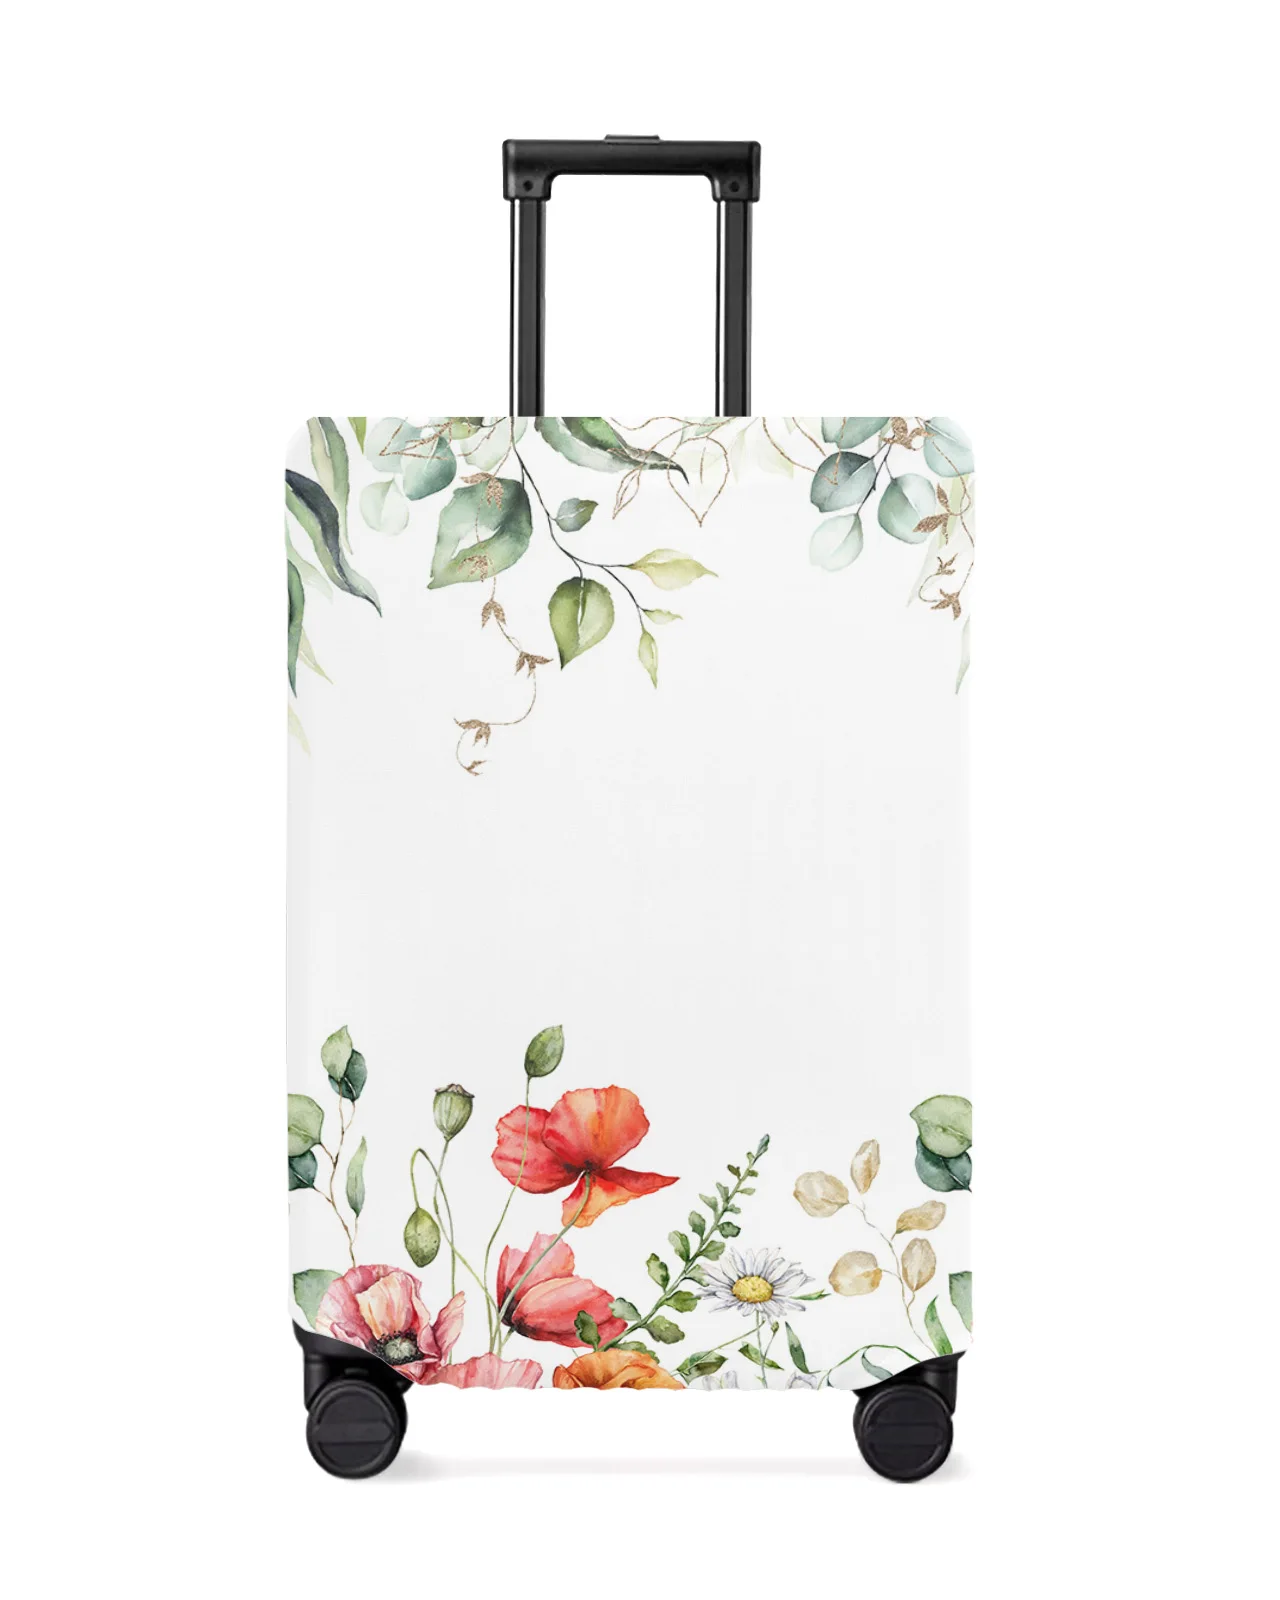 spring-eucalyptus-poppy-flowers-luggage-cover-stretch-suitcase-protector-baggage-dust-cover-for-18-32-inch-travel-suitcase-case